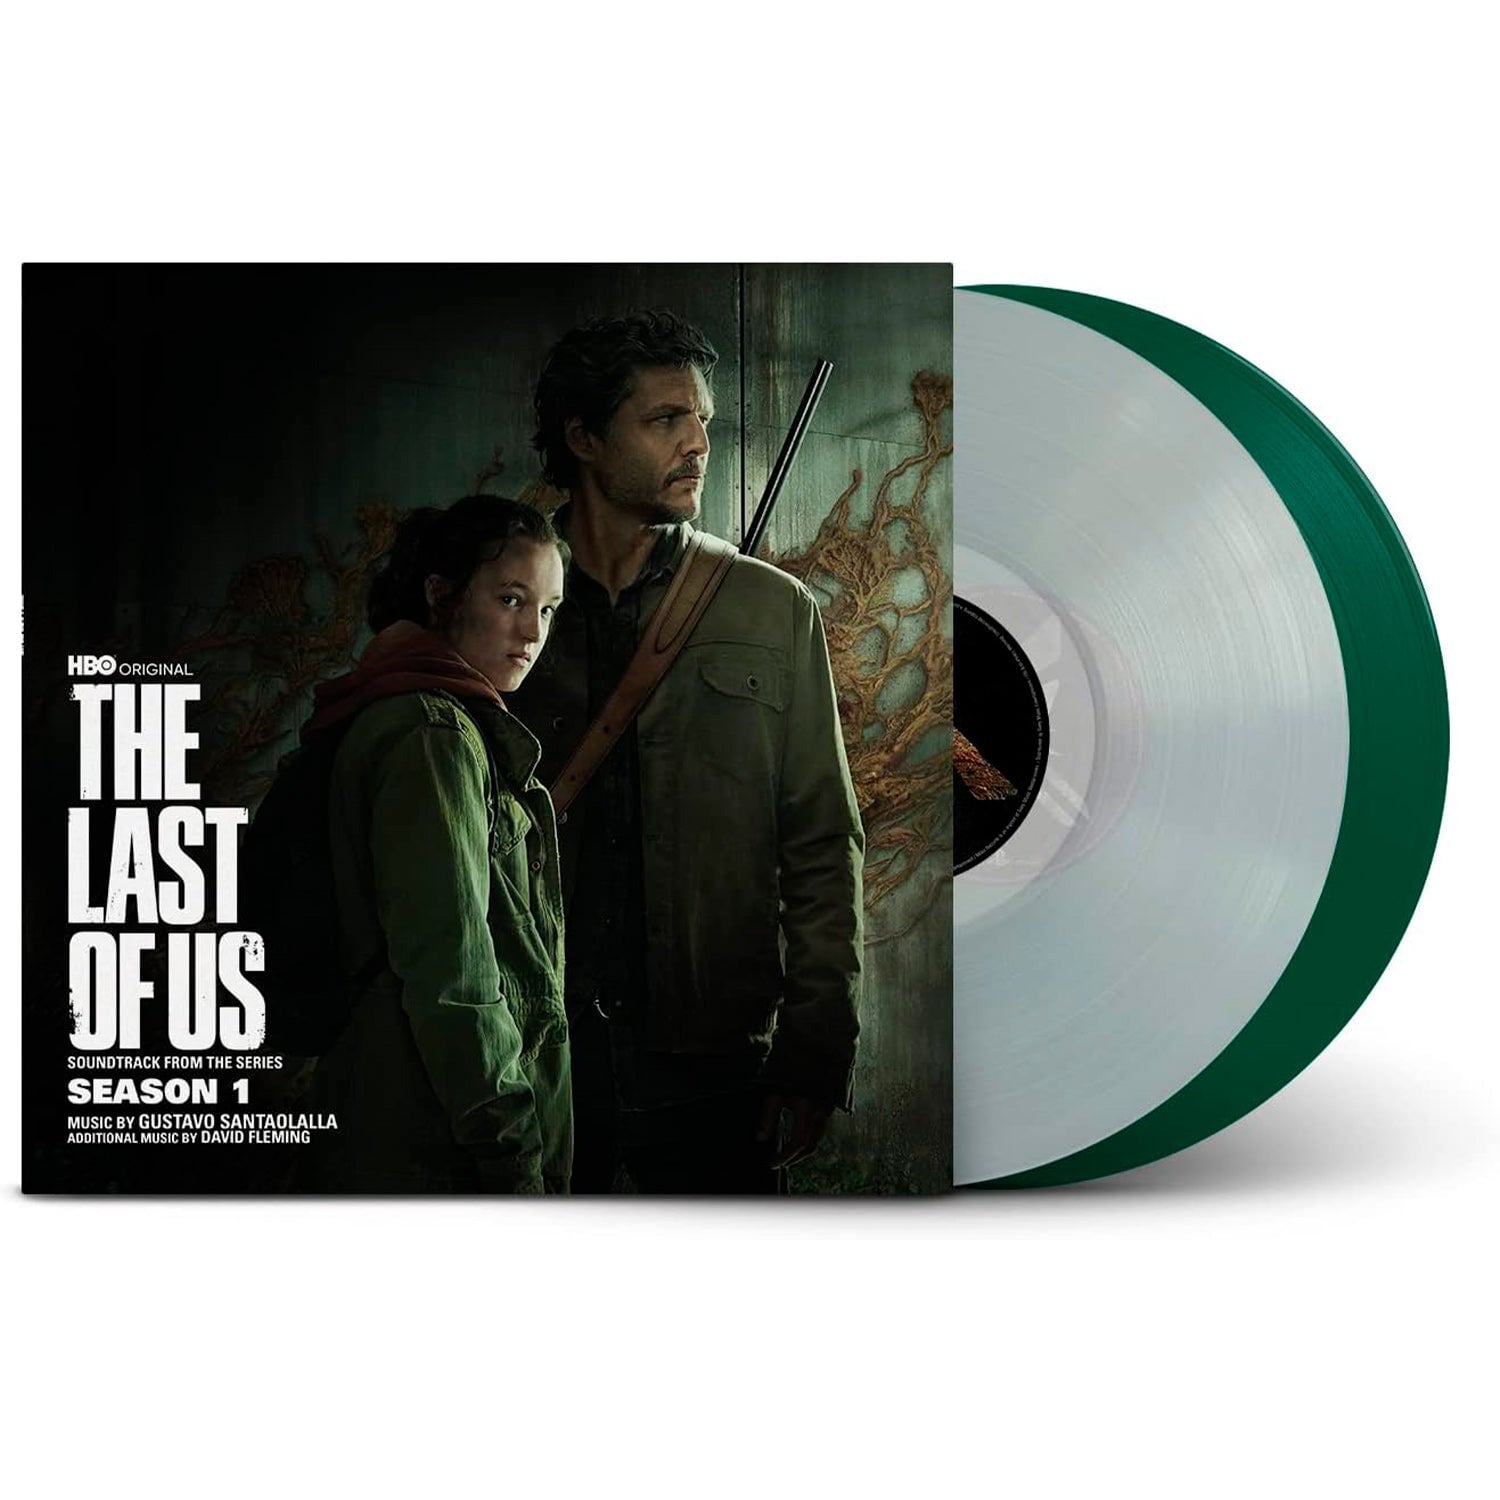 The Last Of Us: Season 1 (Soundtrack From The HBO Original Series) (Color Vinyl 2LP)